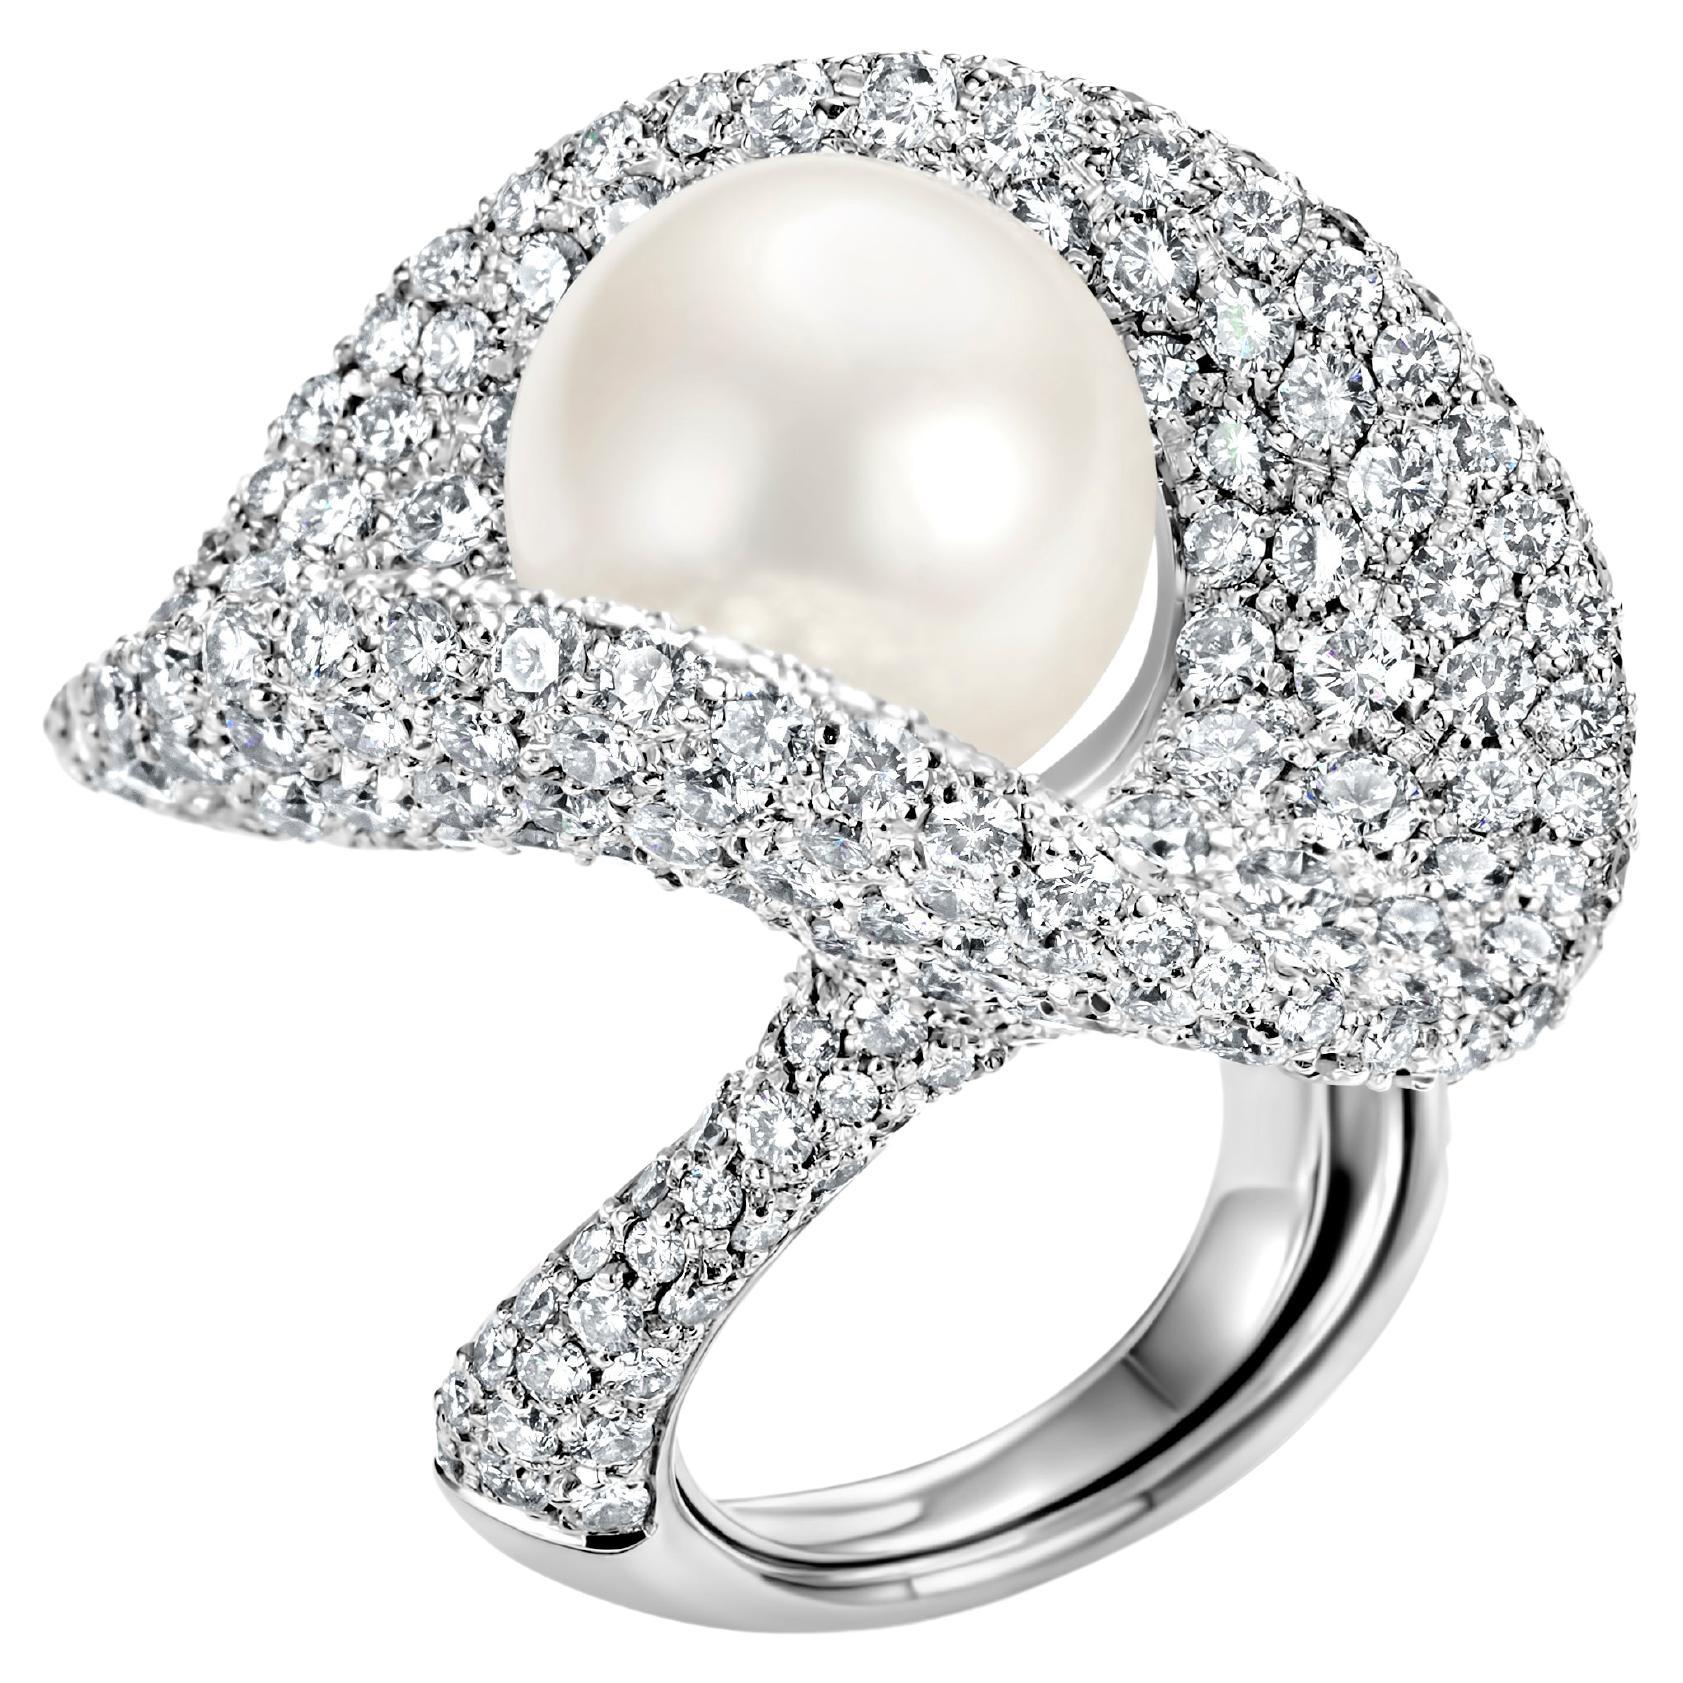 Magnificent 18 Karat White Gold Ring with 14.5 Carat Diamonds and a Big Pearl For Sale 10